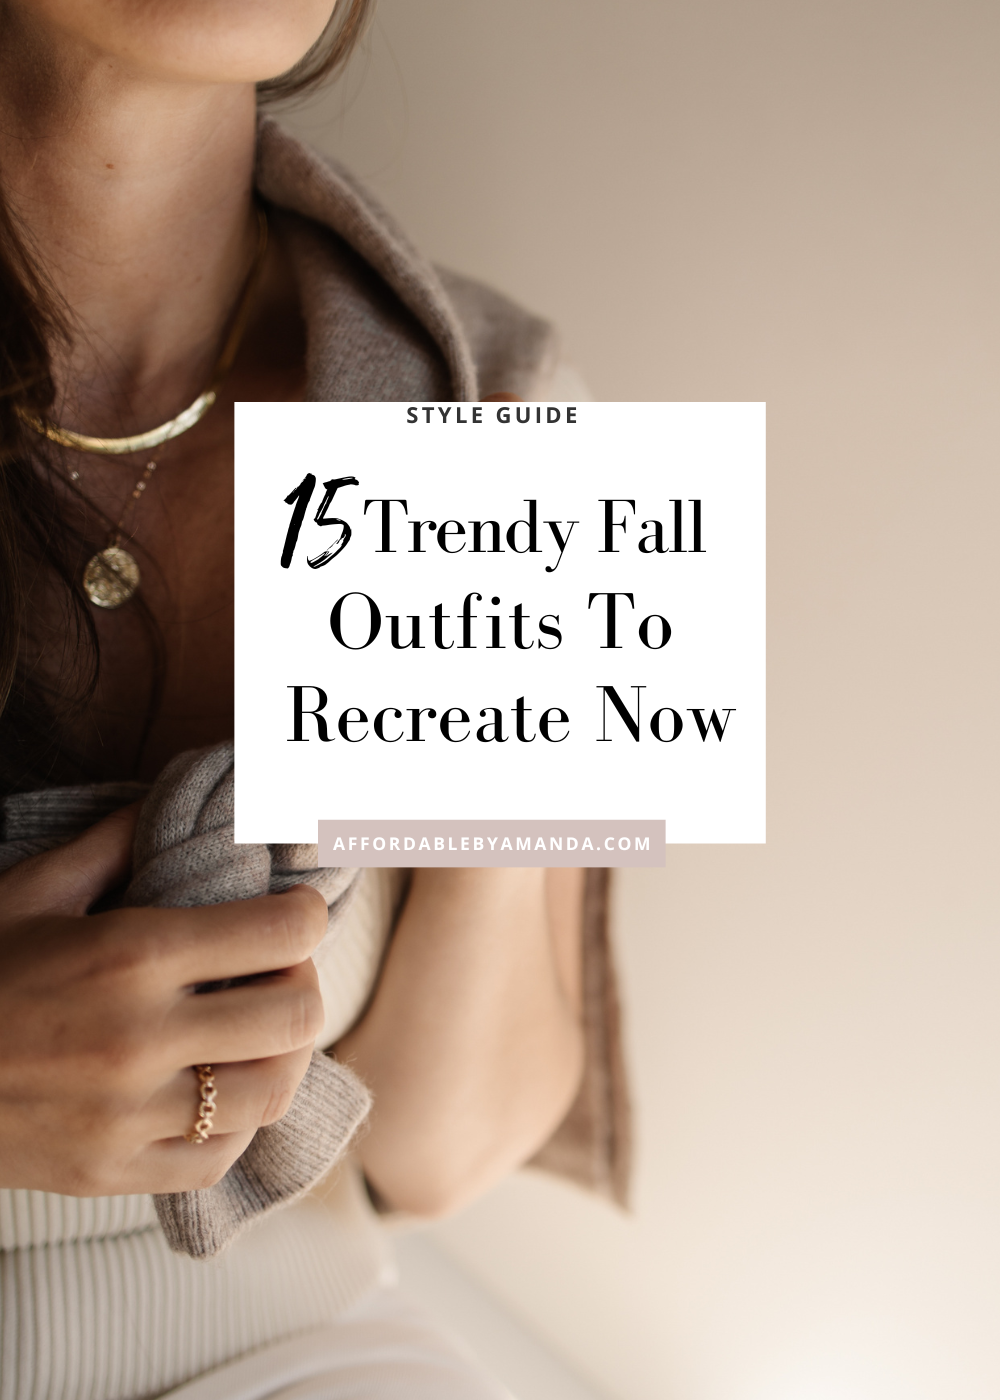 15 Trendy Fall Outfits To Recreate Now - Affordable by Amanda